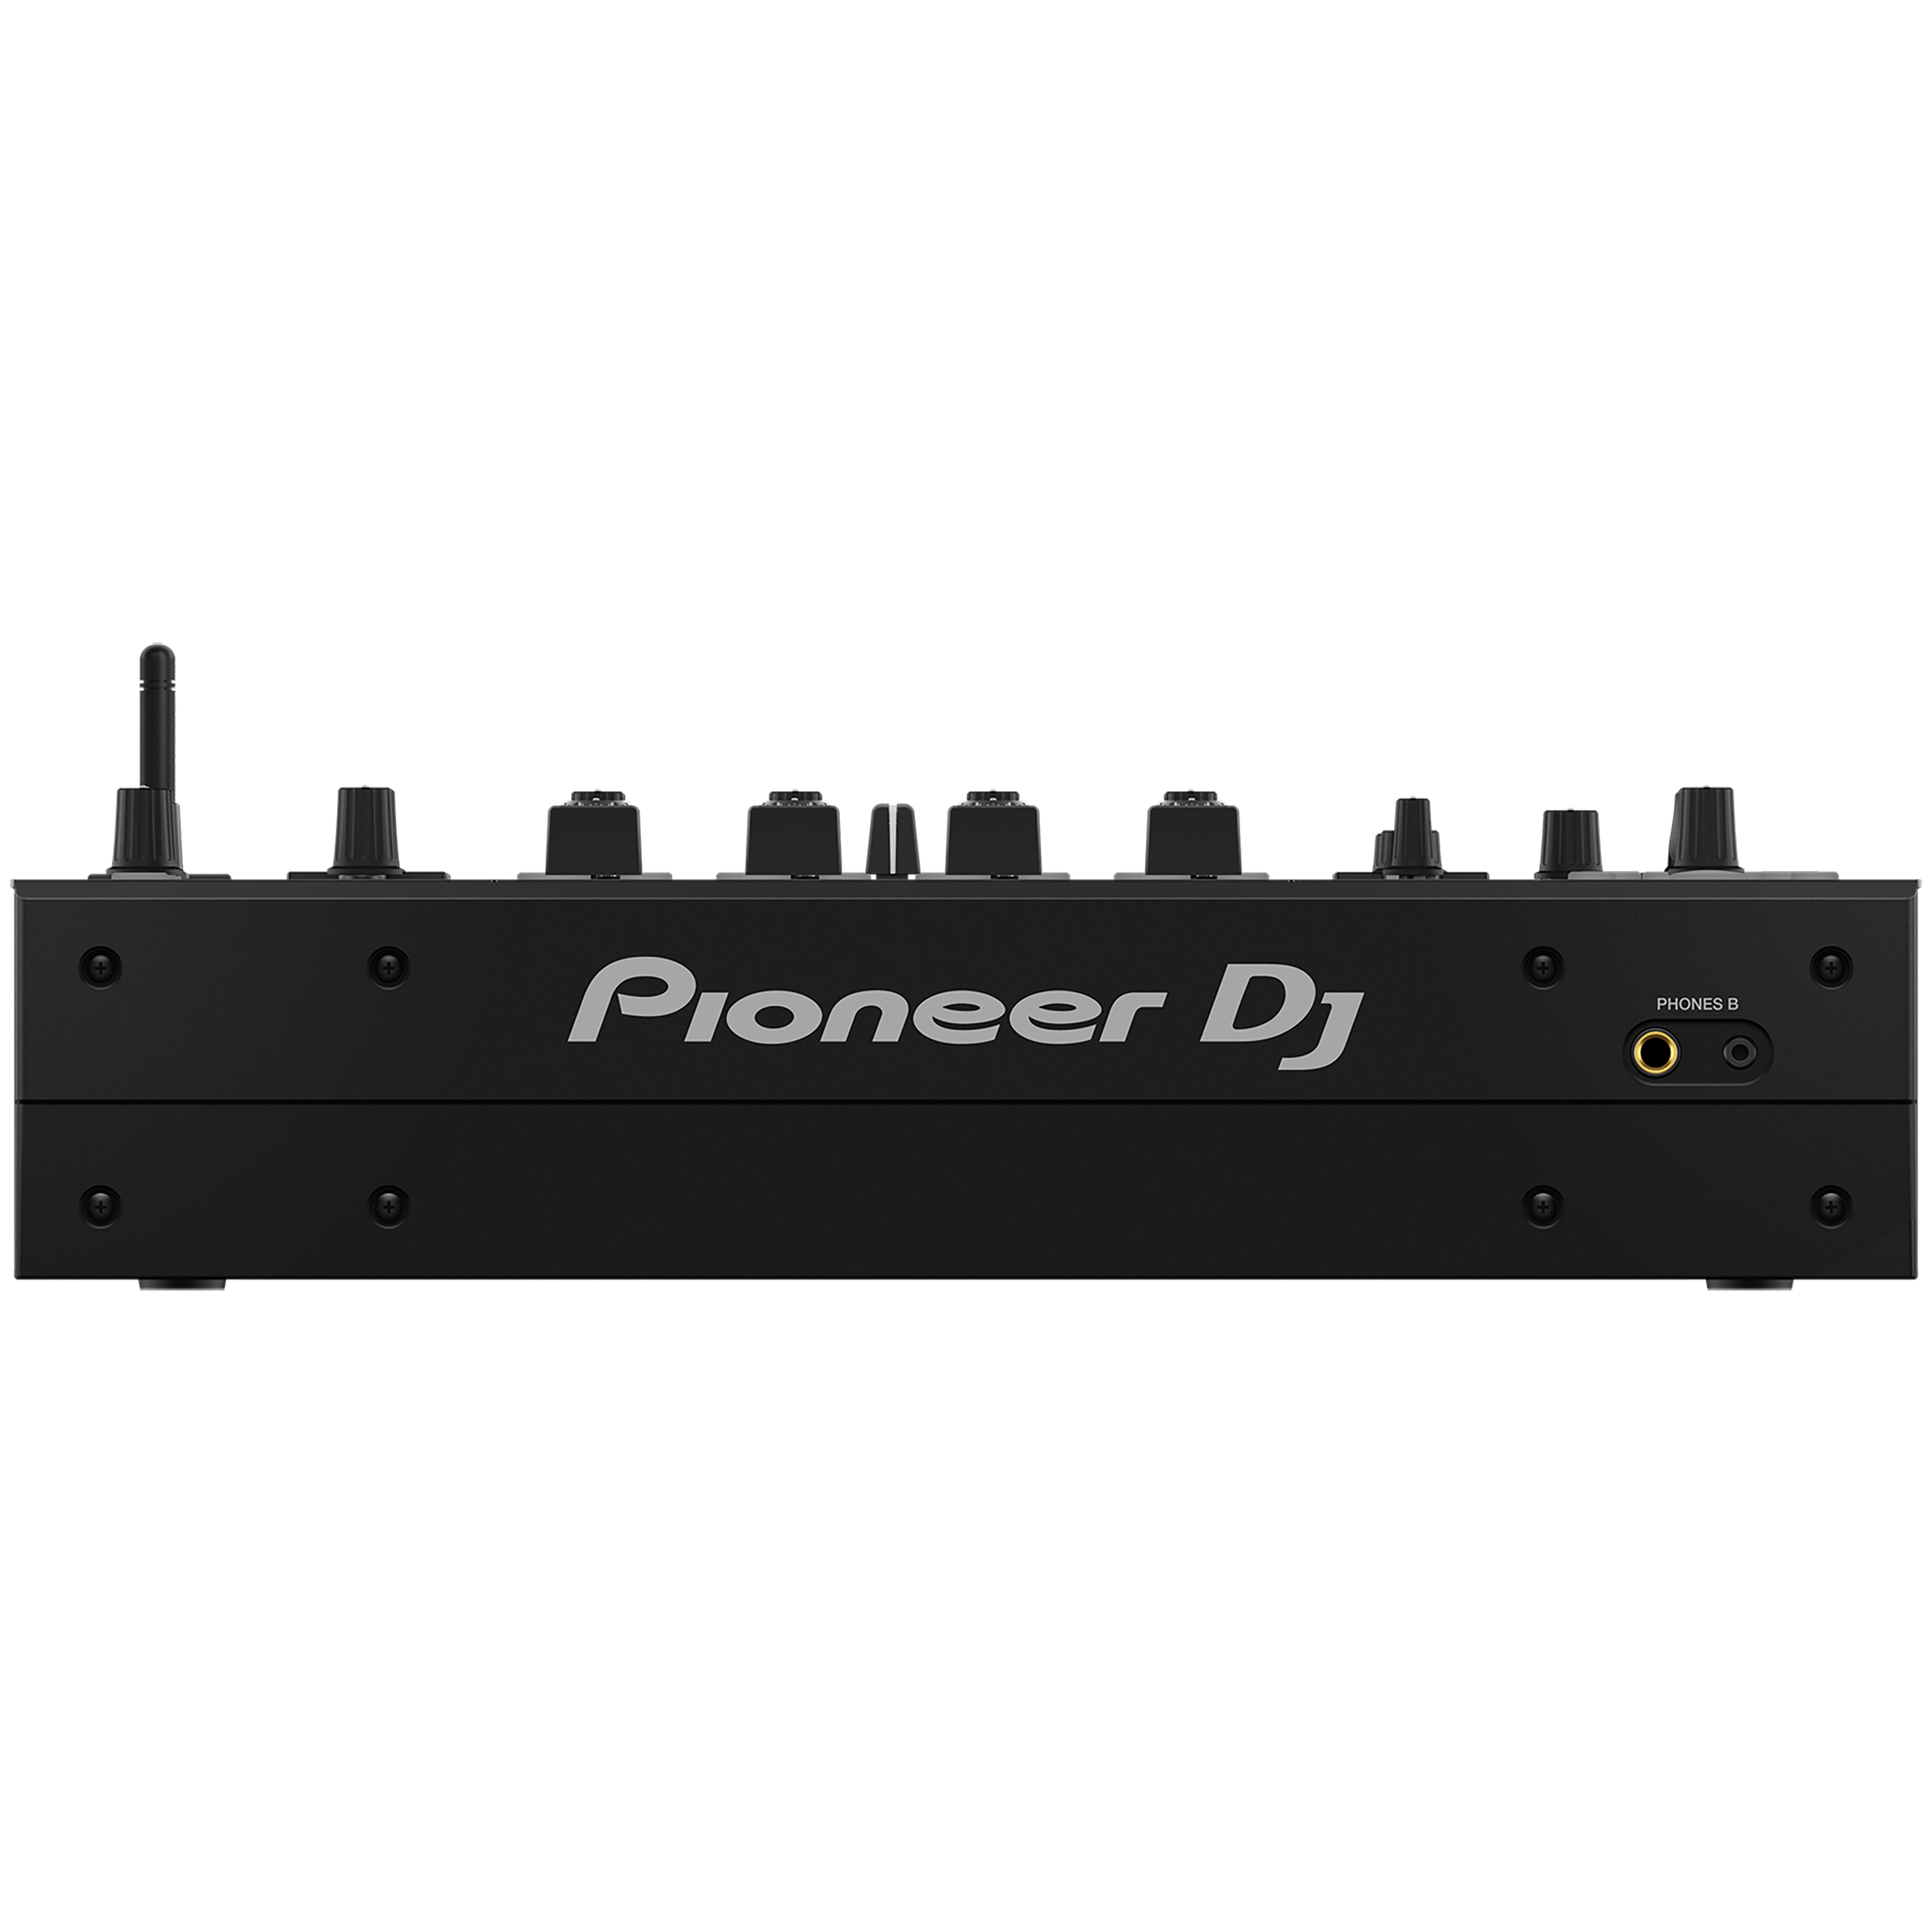 Pioneer DJ DJM-A9 tourPack with BYFP ipCase